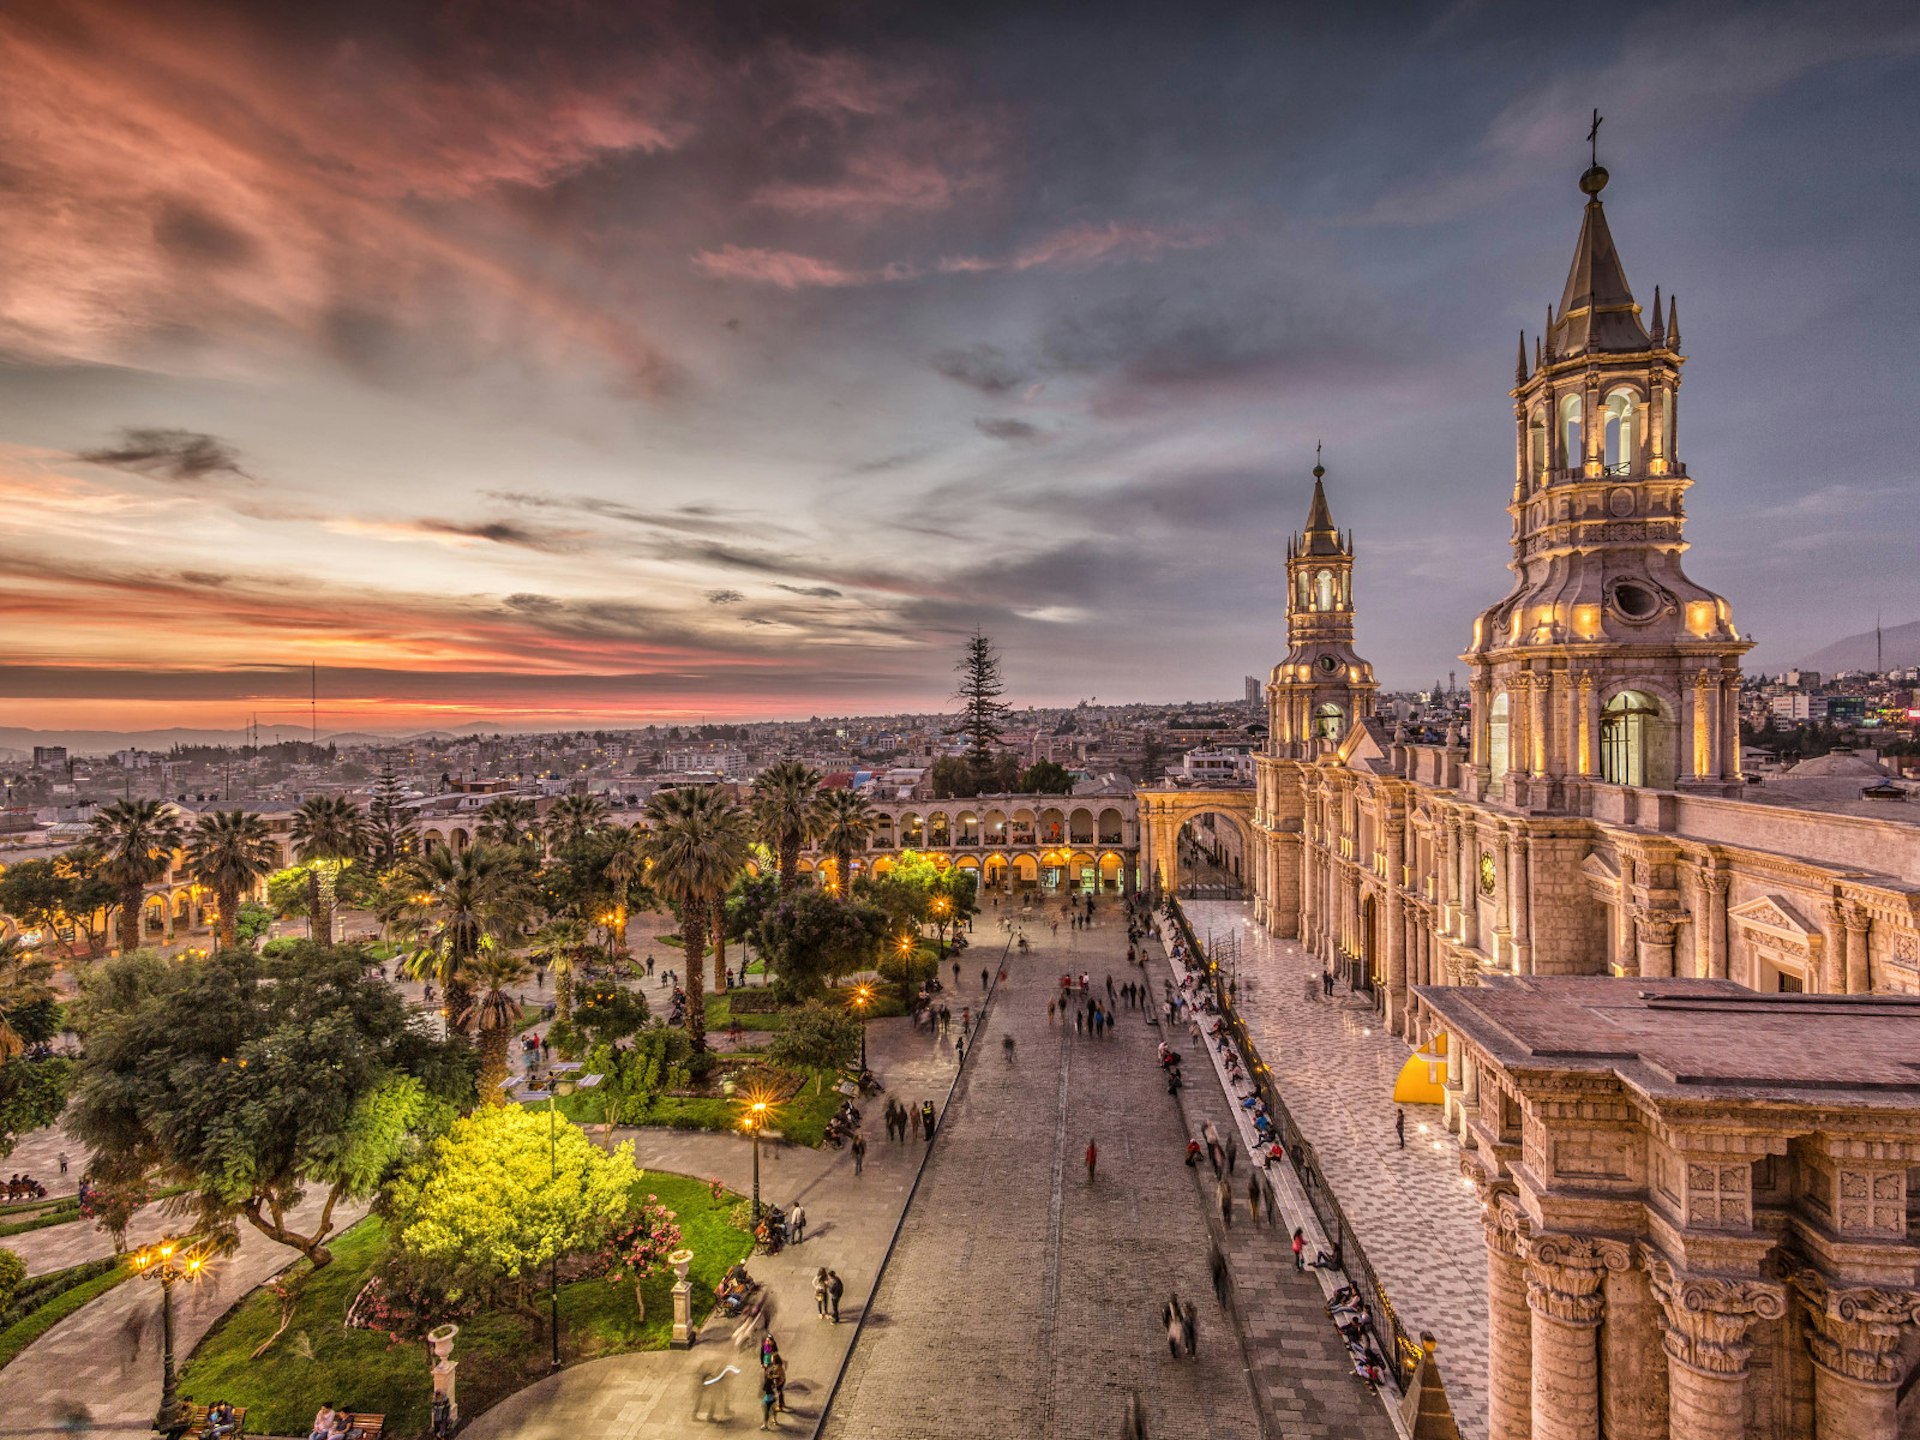 As night falls over Arequipa the city takes on a new soul